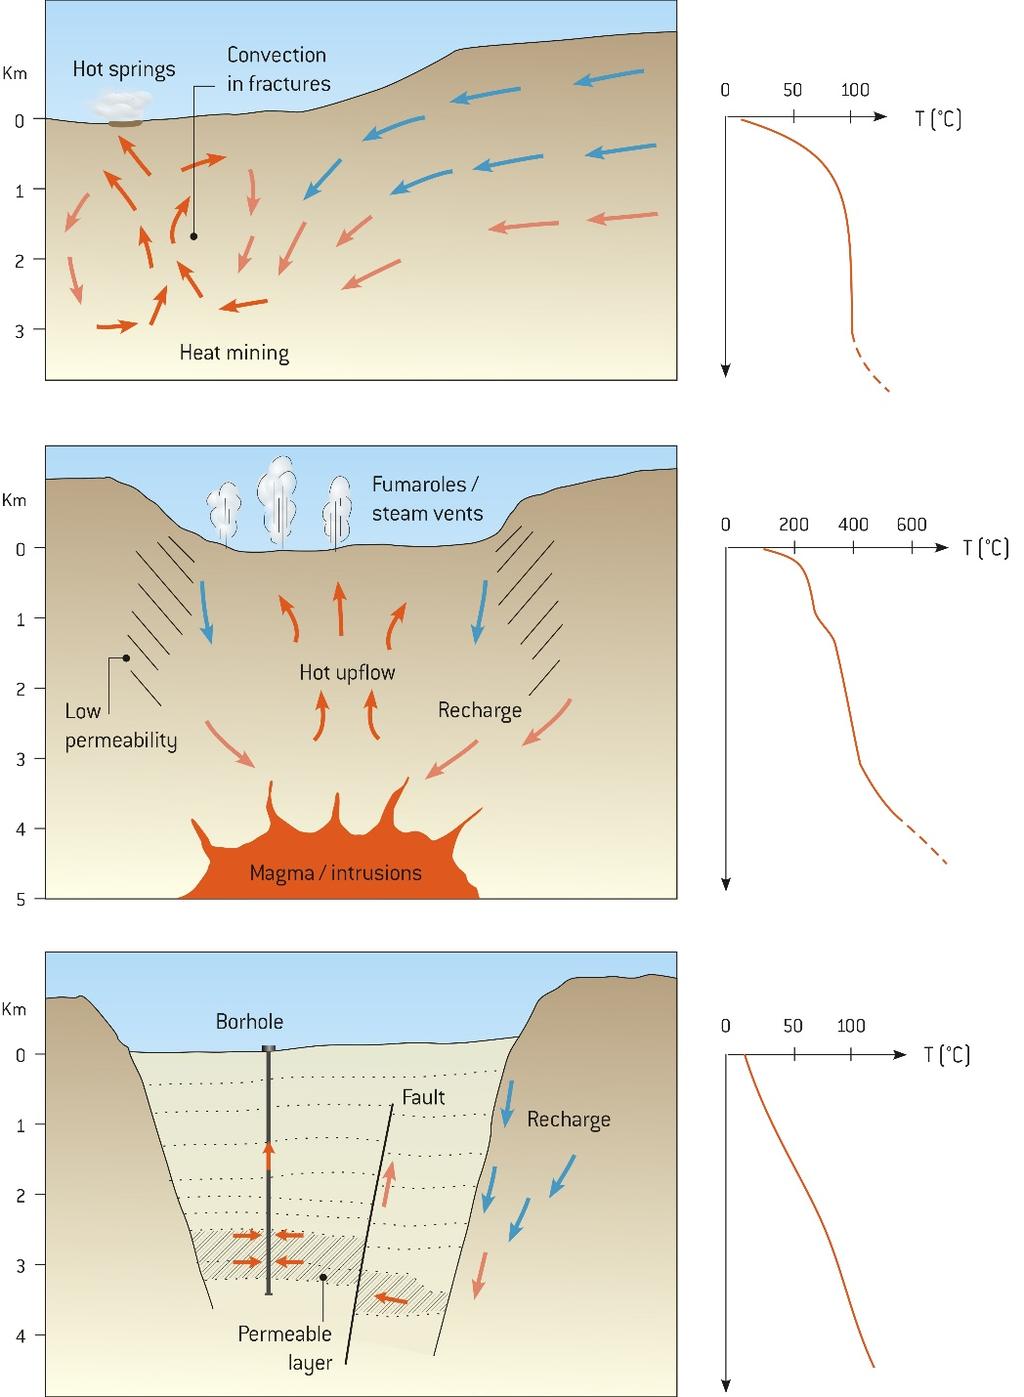 Nature and Assessment 5 Axelsson FIGURE 1: Schematic figures of the three main types of geothermal systems (A, B and C) along with typical temperature profiles The heat source mechanism of volcanic